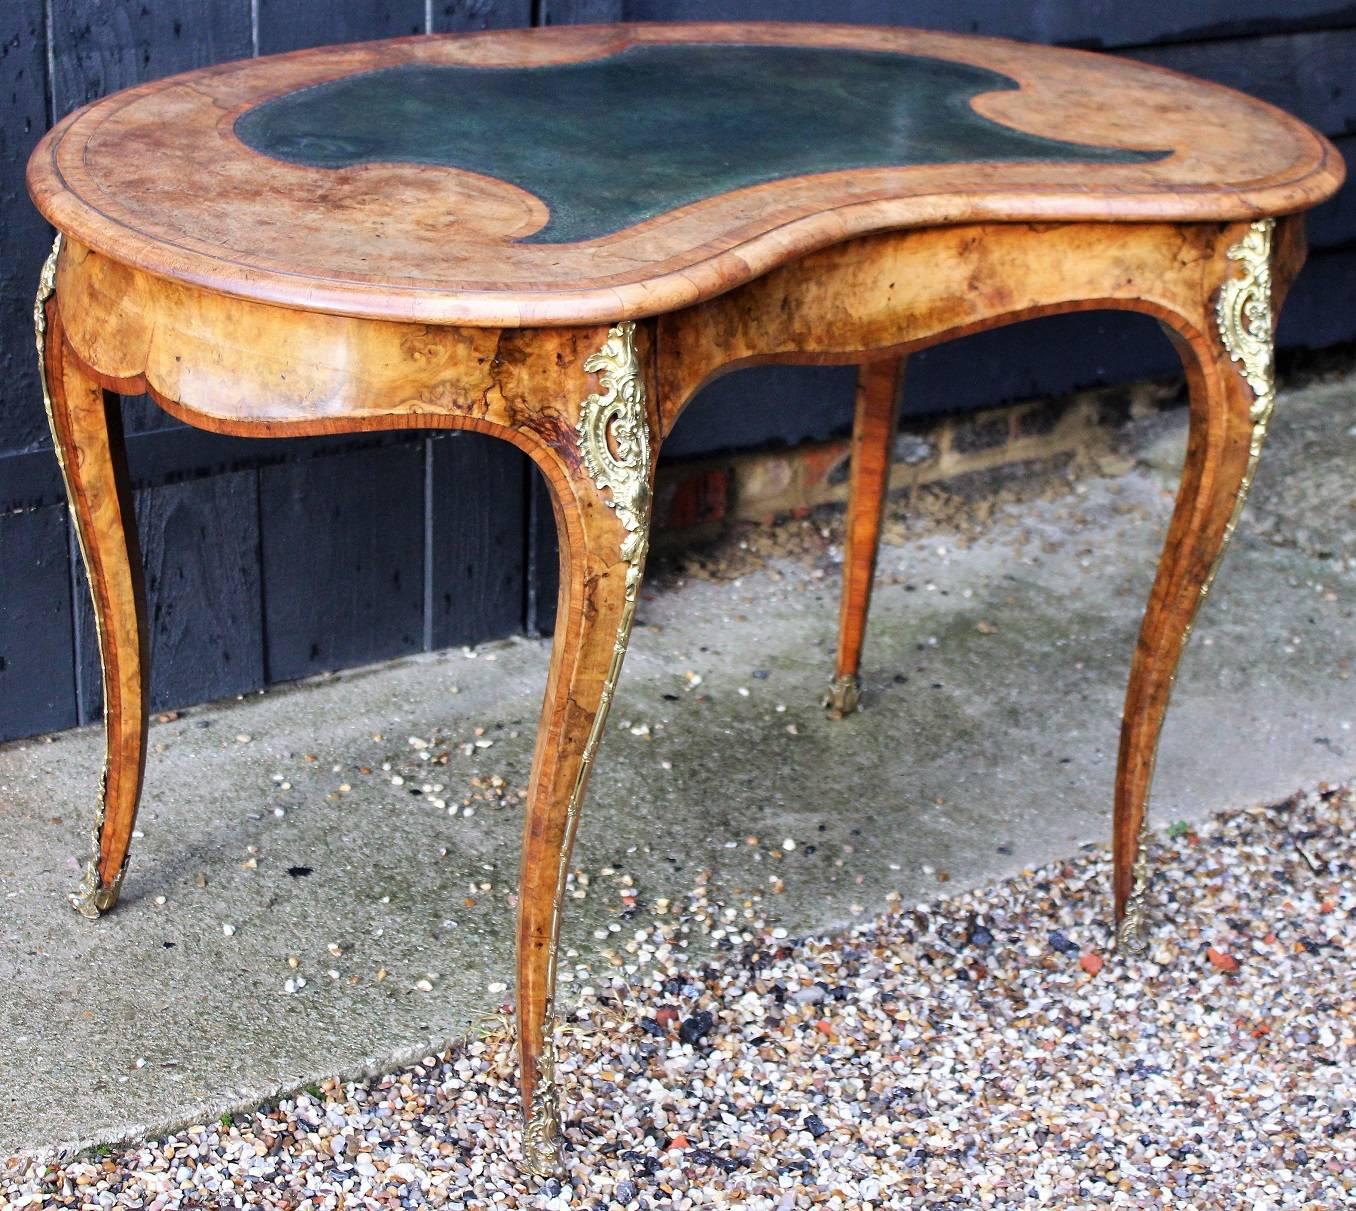 Fine Victorian Ladies writing table, in the French style, kidney shaped, walnut and rosewood crossbanded with ormolu mounts, fitted with a single drawer, circa 1870, attributed to Gillows.
This handsome piece was made to sit in the middle of the